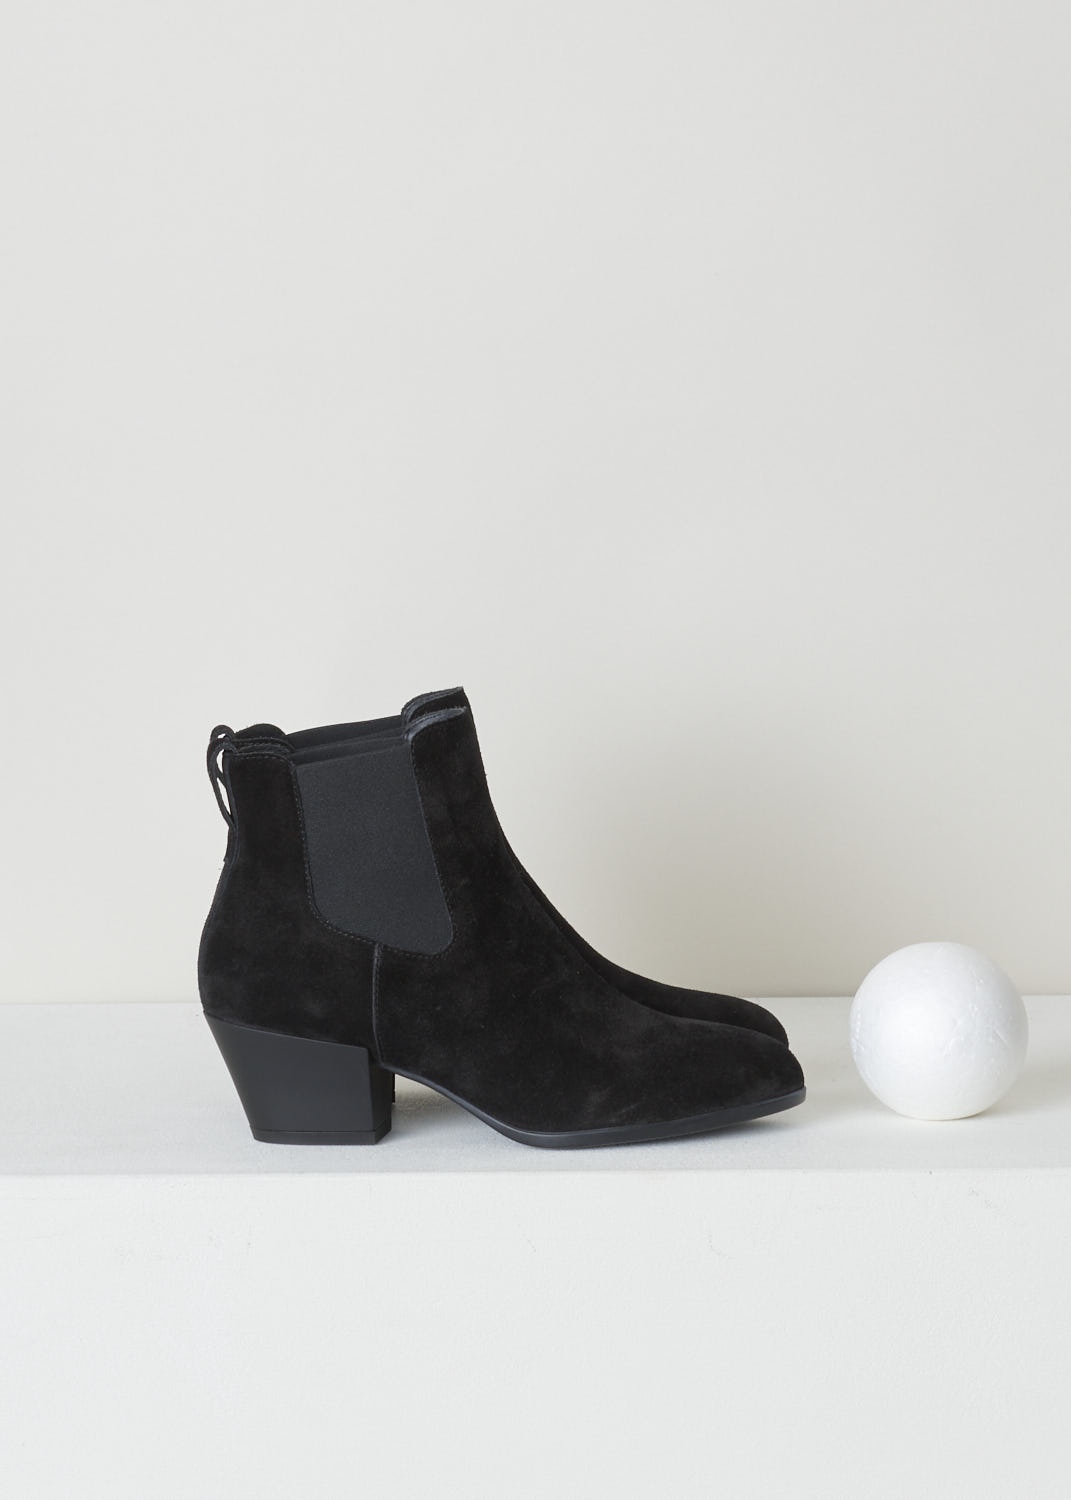 HOGAN, BLACK SUEDE CHELSEA BOOTS, HXW4010W890BYEB999, Black, Side, Black suede Chelsea boots featuring an elastic side panel and a pull tab on the back of the boot. These boots have a small heel and a pointed toe.  

Heel height: 5.5 cm / 2.1 inch
